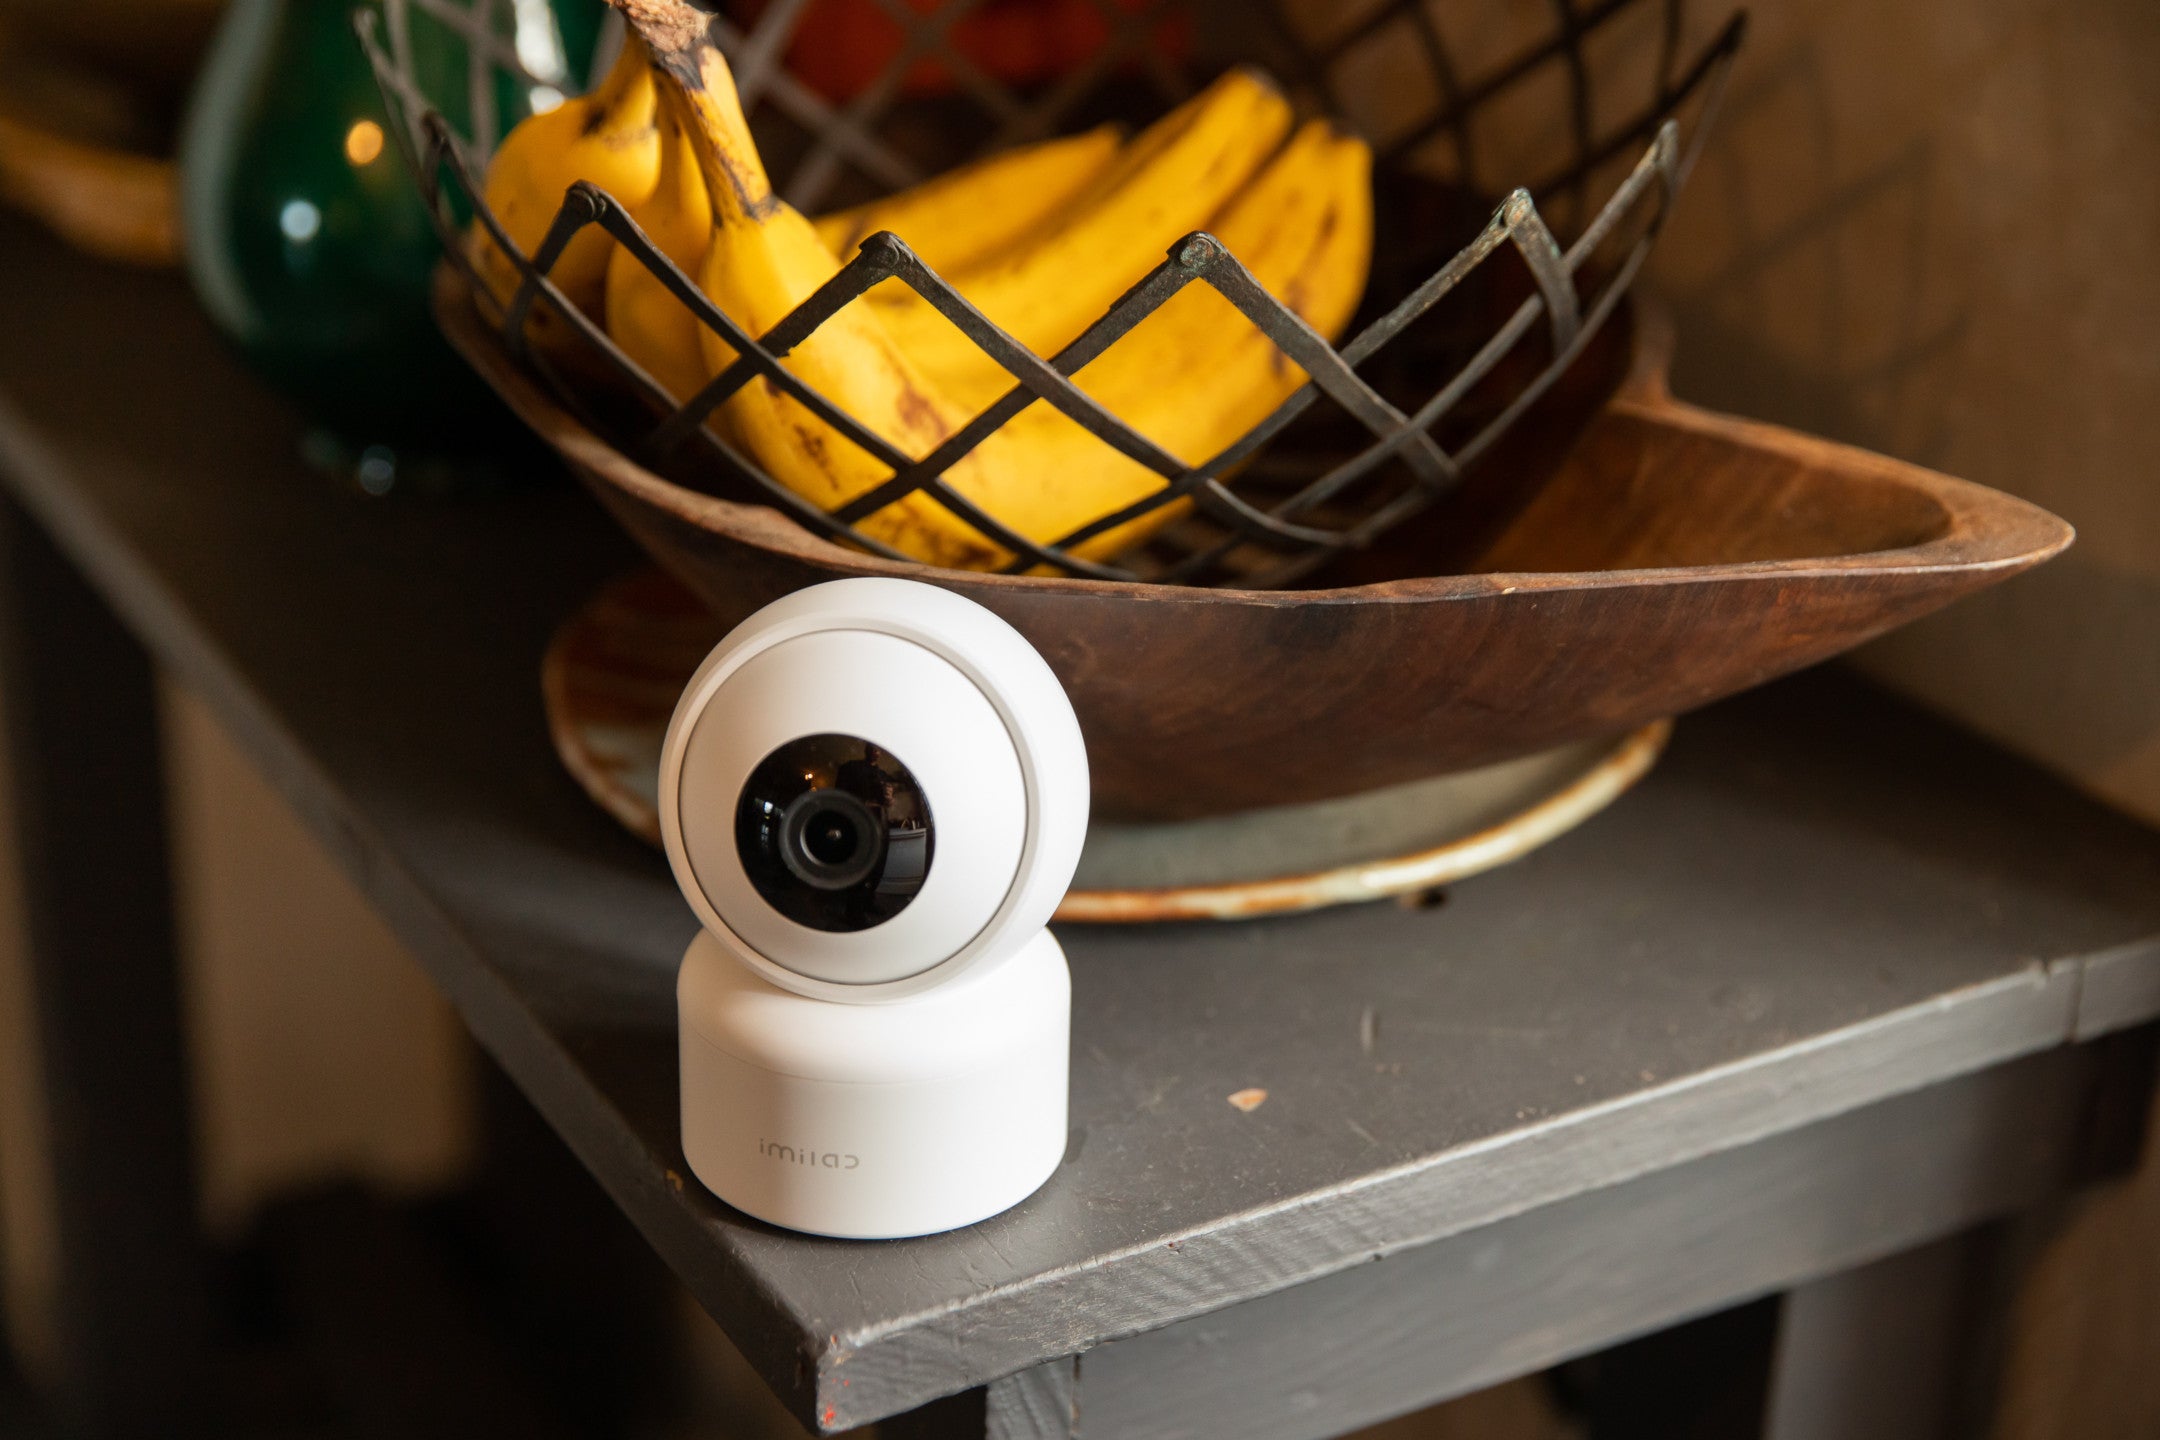 Back to School or Back To Work Busy Parents Rely on Imilab Cameras to Keep Their Kids Safe